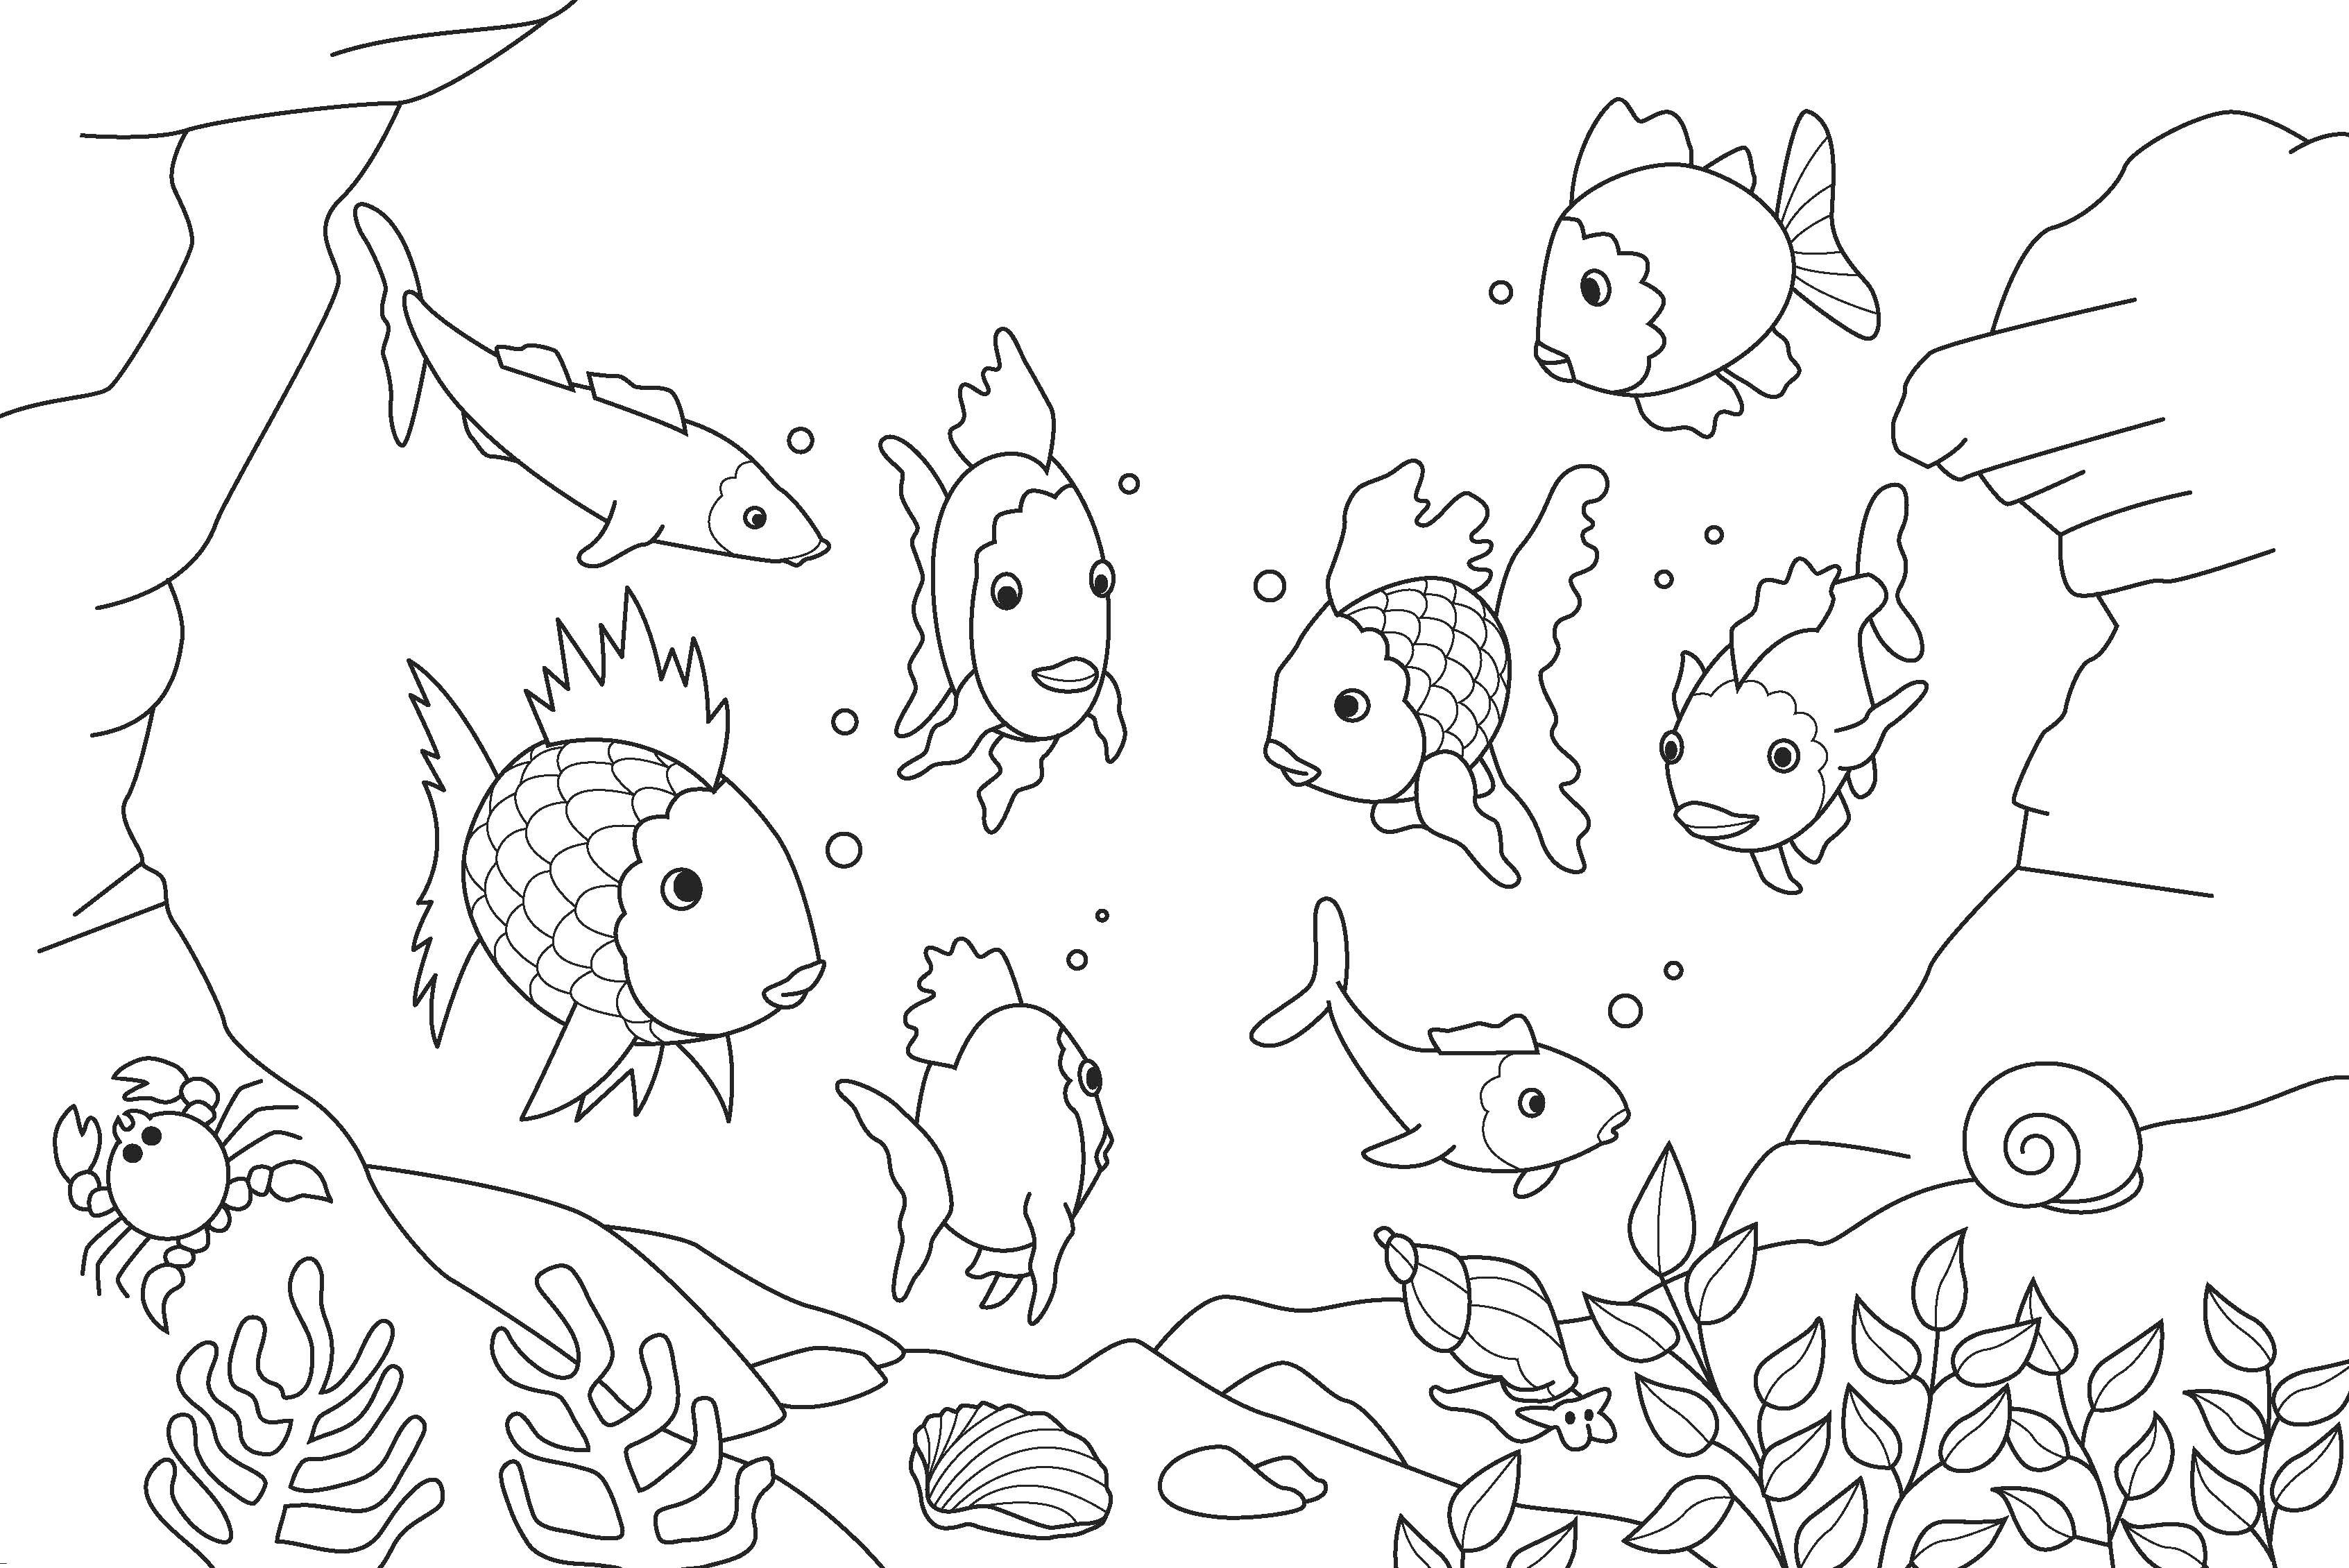 Coloring Fish at the rocks. Category Fish. Tags:  Pisces, sea, seabed.